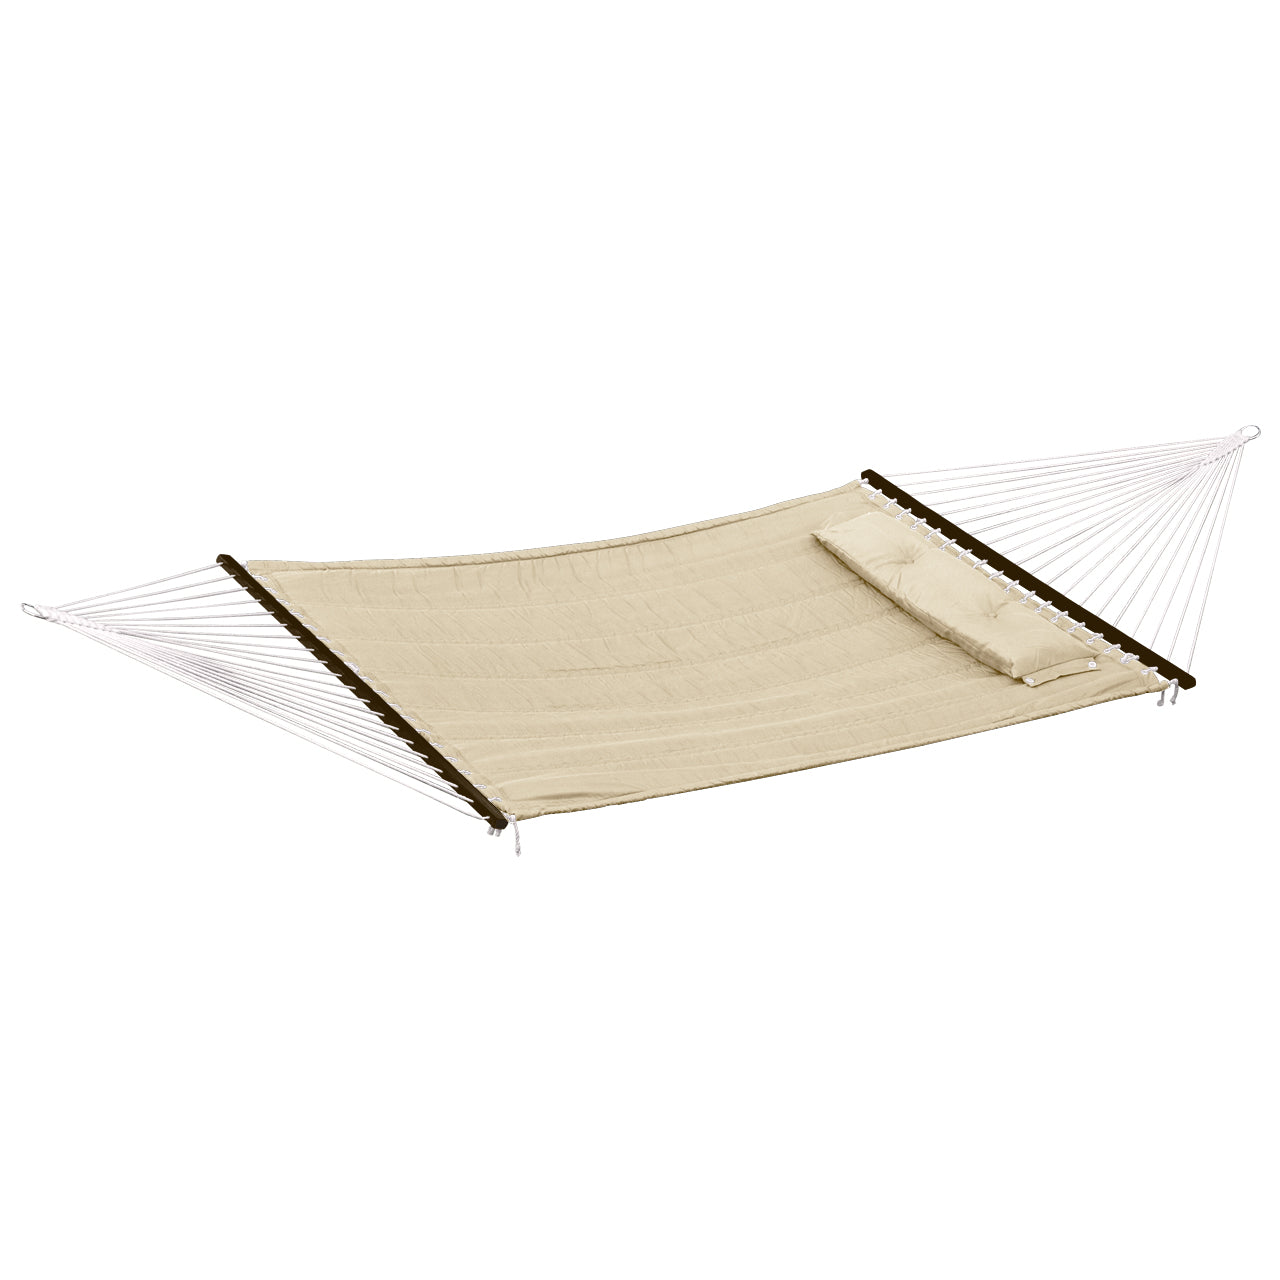 Bliss Hammocks 55-inch Wide Quilted Hammock with Spreader Bars and Pillow in the tan variation.